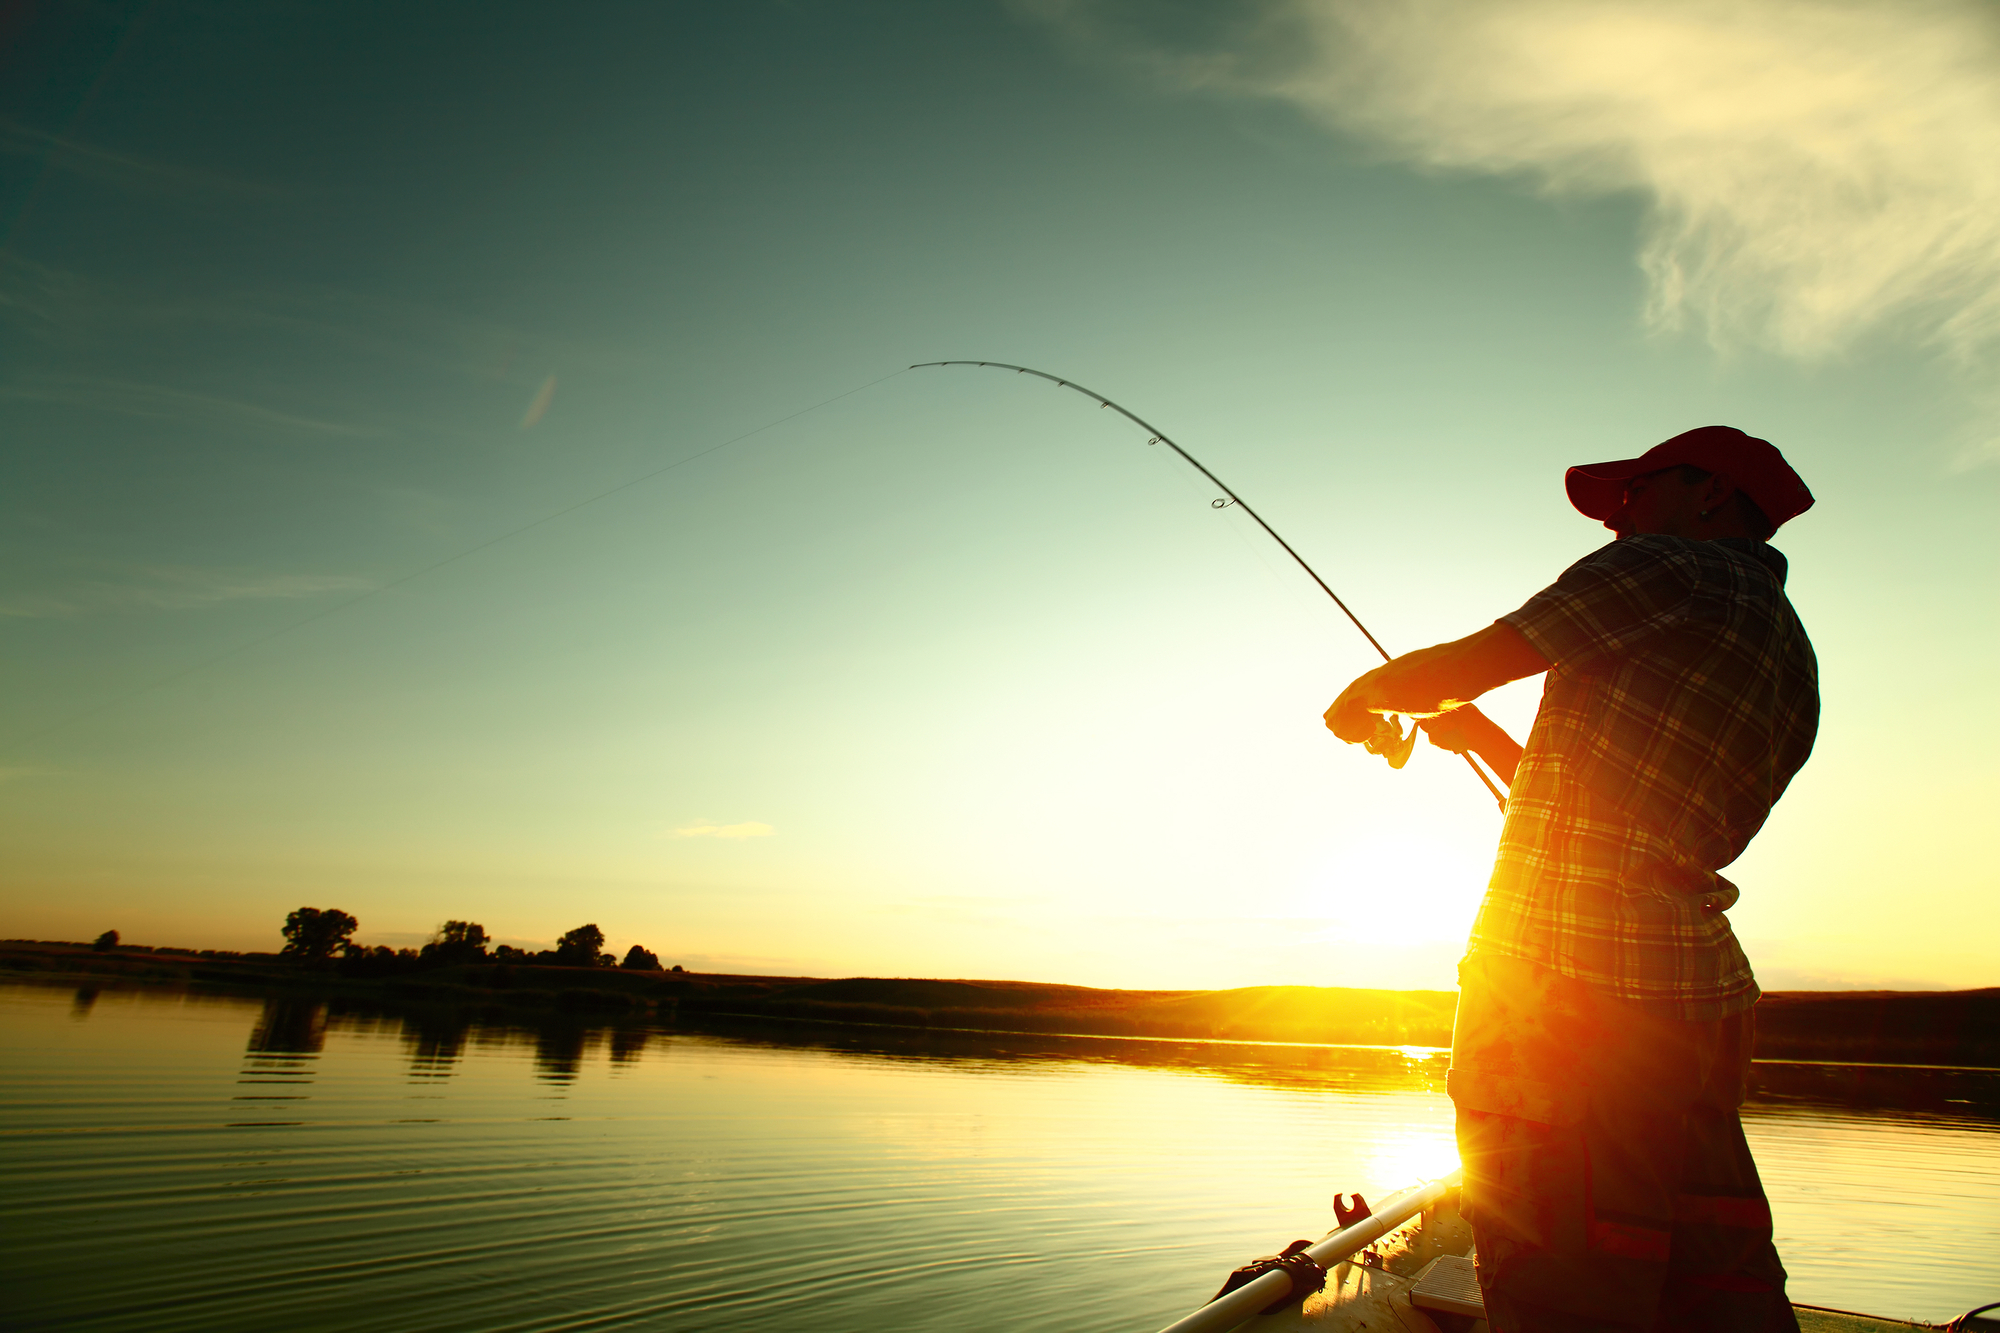 Man fishing a freshwater lake with sunset in background